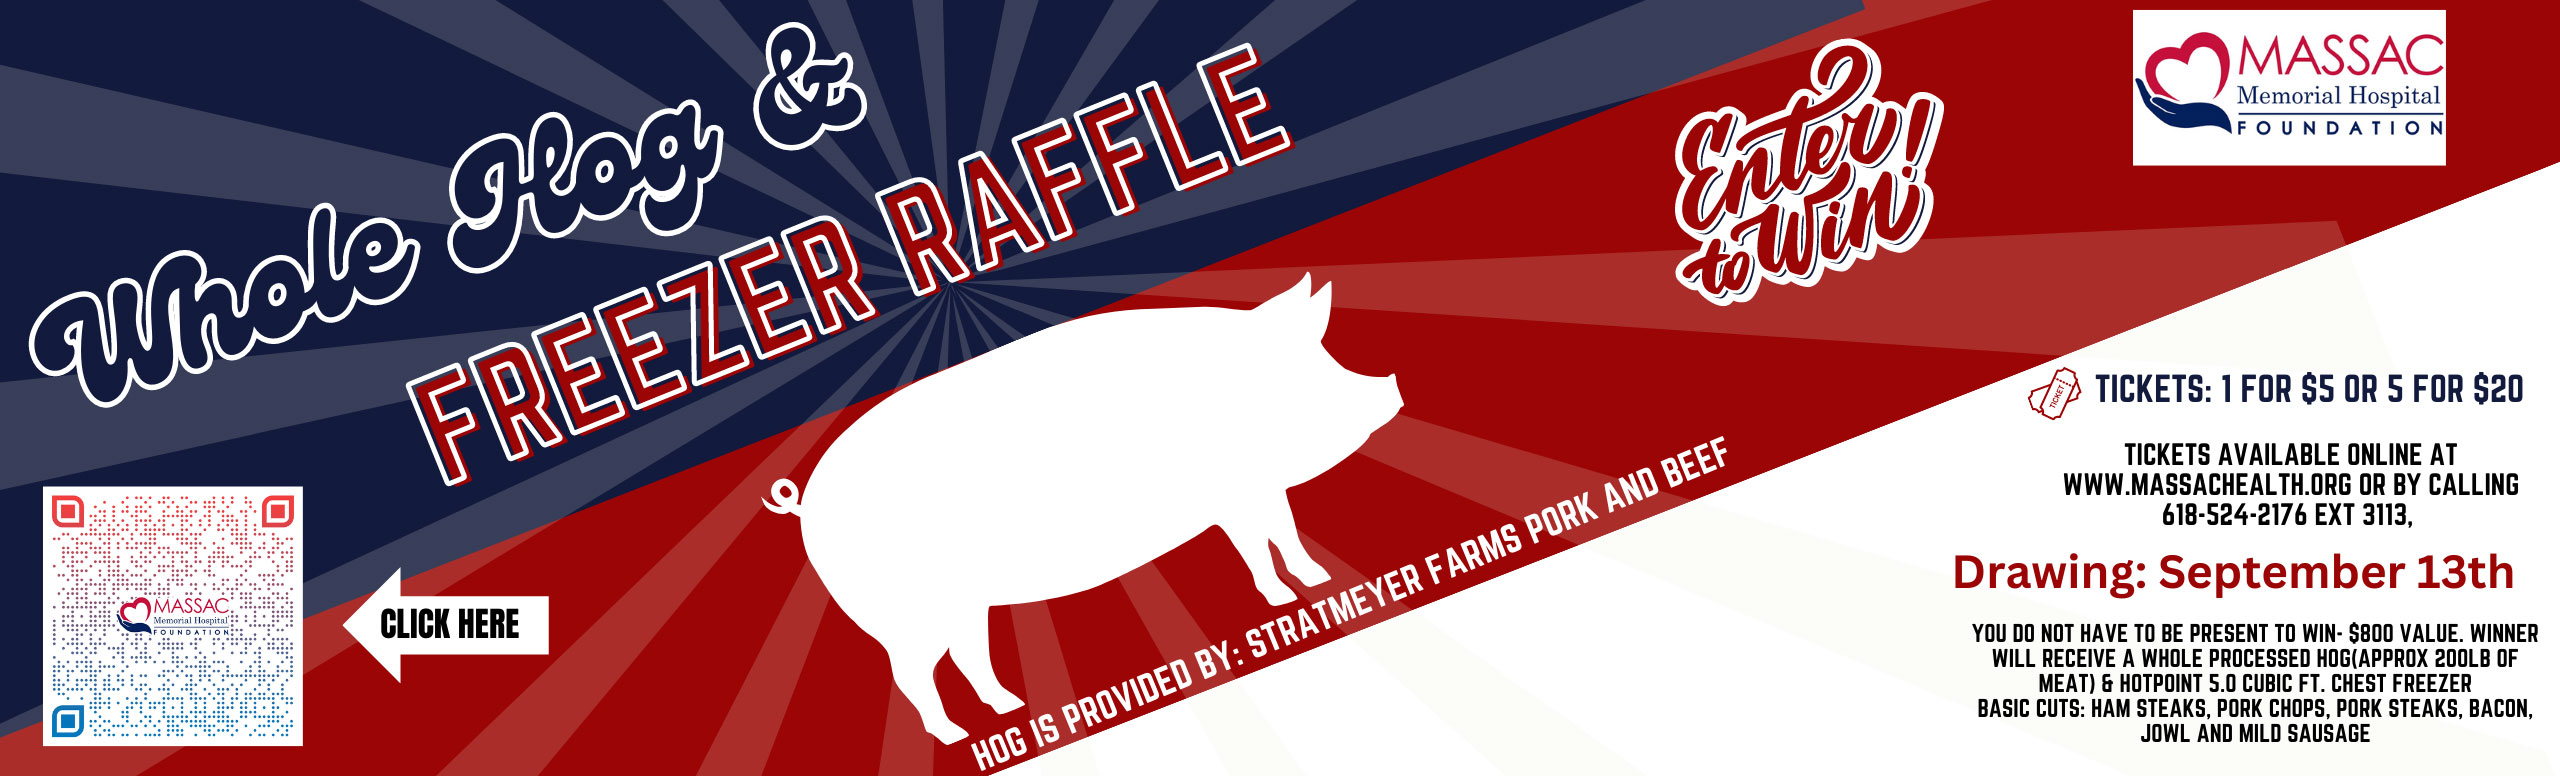 MASSAC MEMORIAL HOSPITAL FOUNDATION

WHOLE HOG AND FREEZER  RAFFLE
Tickets: 1 for $5 or 5 for $20

HOG IS PROVIDED BY: STRATMEYER FARMS PORK AND BEEF
Enter to Win!


TICKETS AVAILABLE ONLINE AT WWW.MASSACHEALTH.ORG OR BY CALLING 618-524-2176 EXT 3113,

Drawing: September 13th


YOU DO NOT HAVE TO PRESENT TO WIN- $800 VALUE. WINNER WILL RECIEVE A WHOLE PROCESSED HOG (APPROX 200LB OF  MEAT AND HOTPOINT 5.9 VUBIC FT. CHEST FREEZER 
BASIC CUTS: HAM STEAKS, PORK CHOPS, PORK STEAKS, BACON JOWL AND MILD SAUSAGE